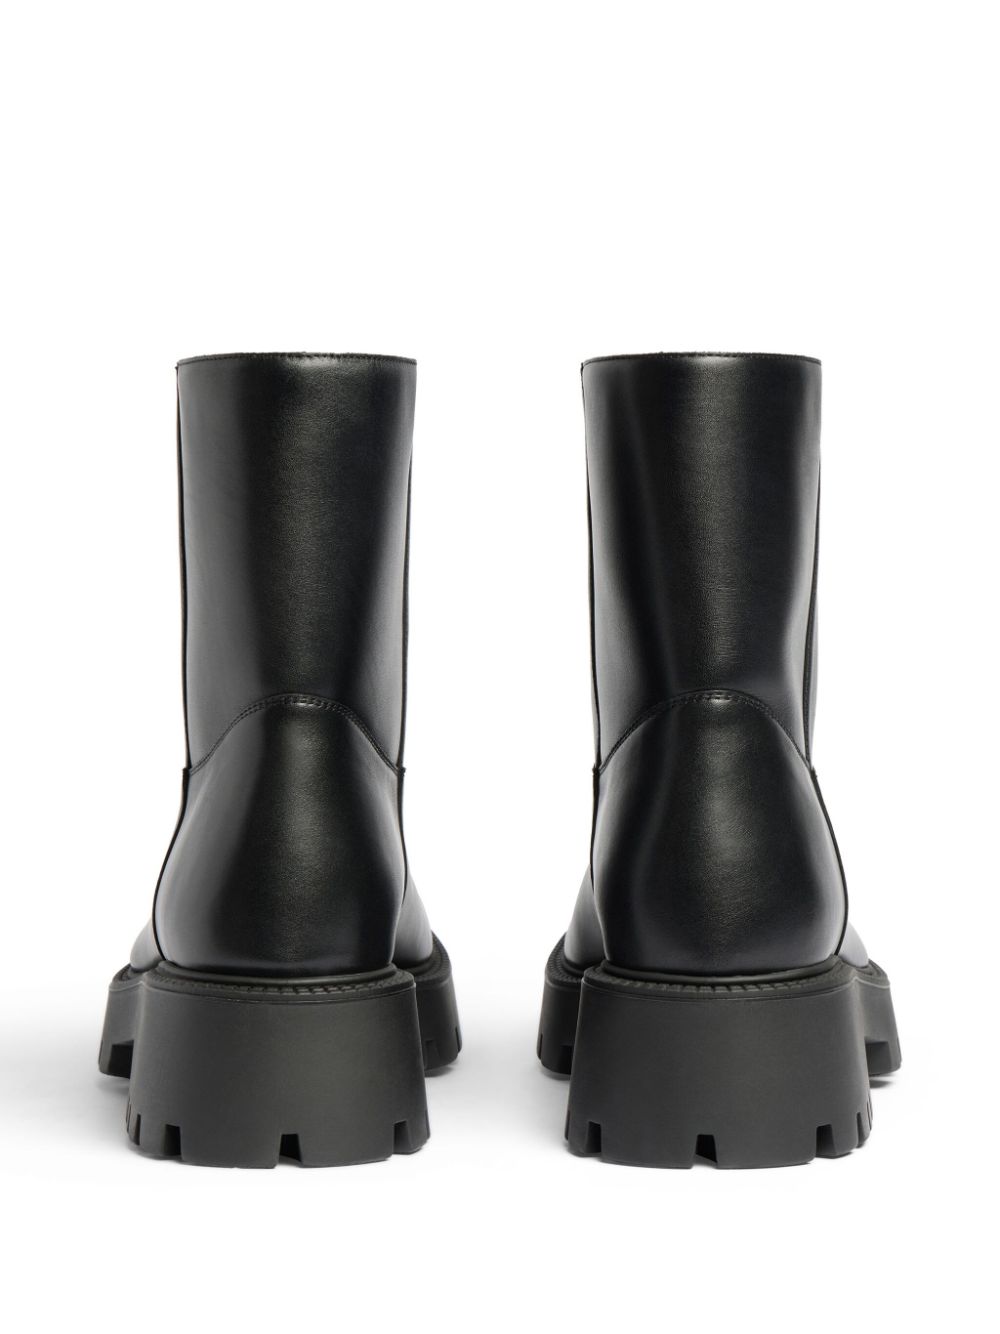 BALENCIAGA Men's Black Leather Boots with Brief-On Design and Rubber Chunky Sole